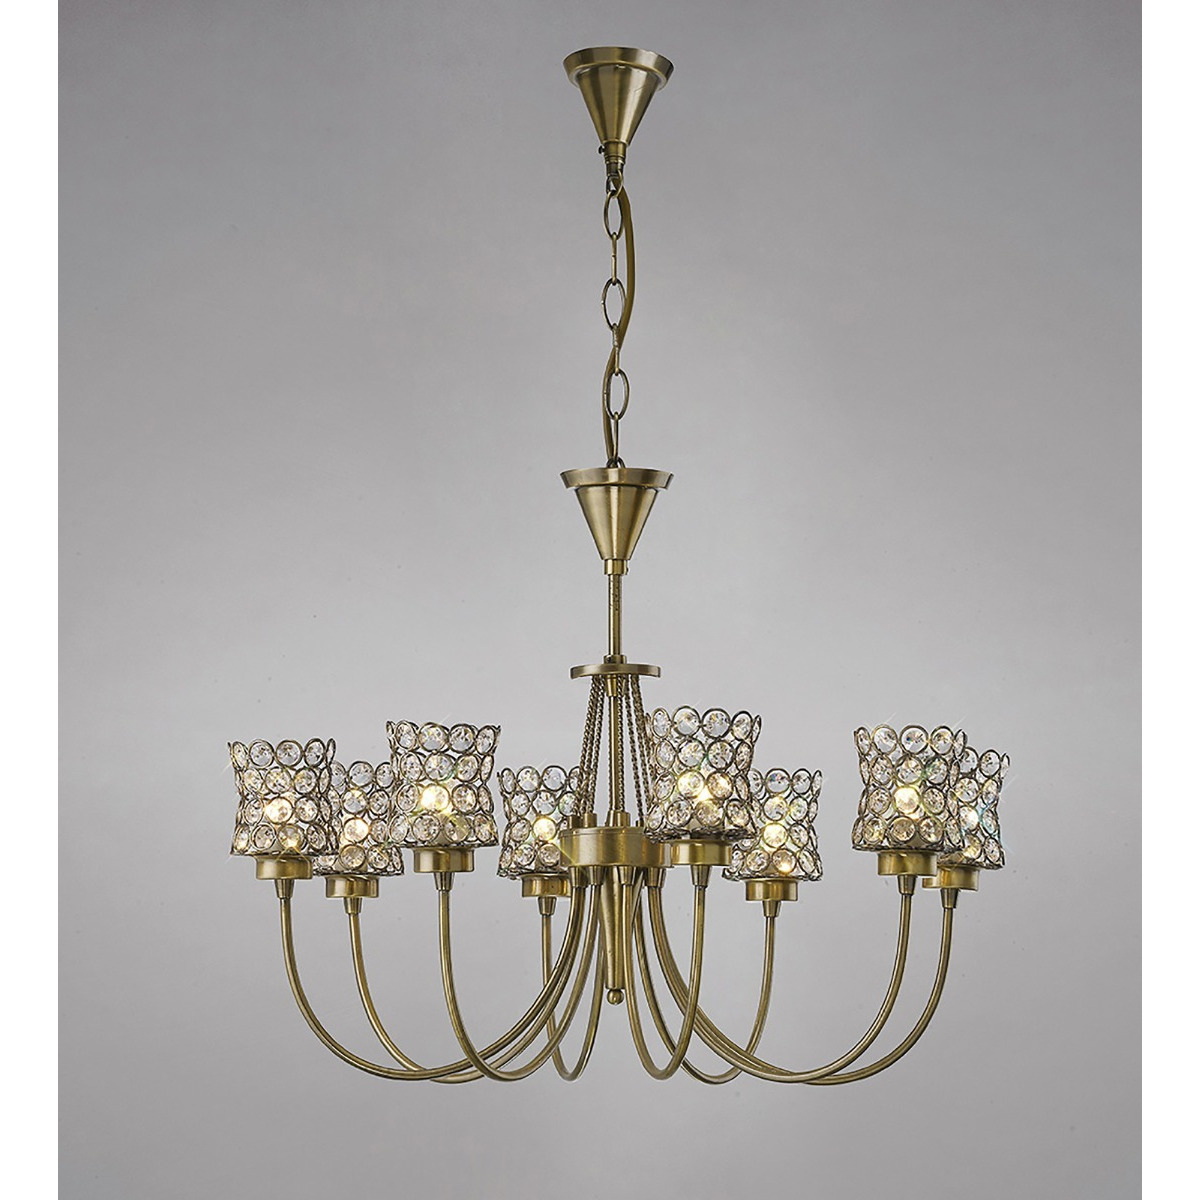 Diyas IL20662 Nelson Ceiling Pendant Light in Antique Brass